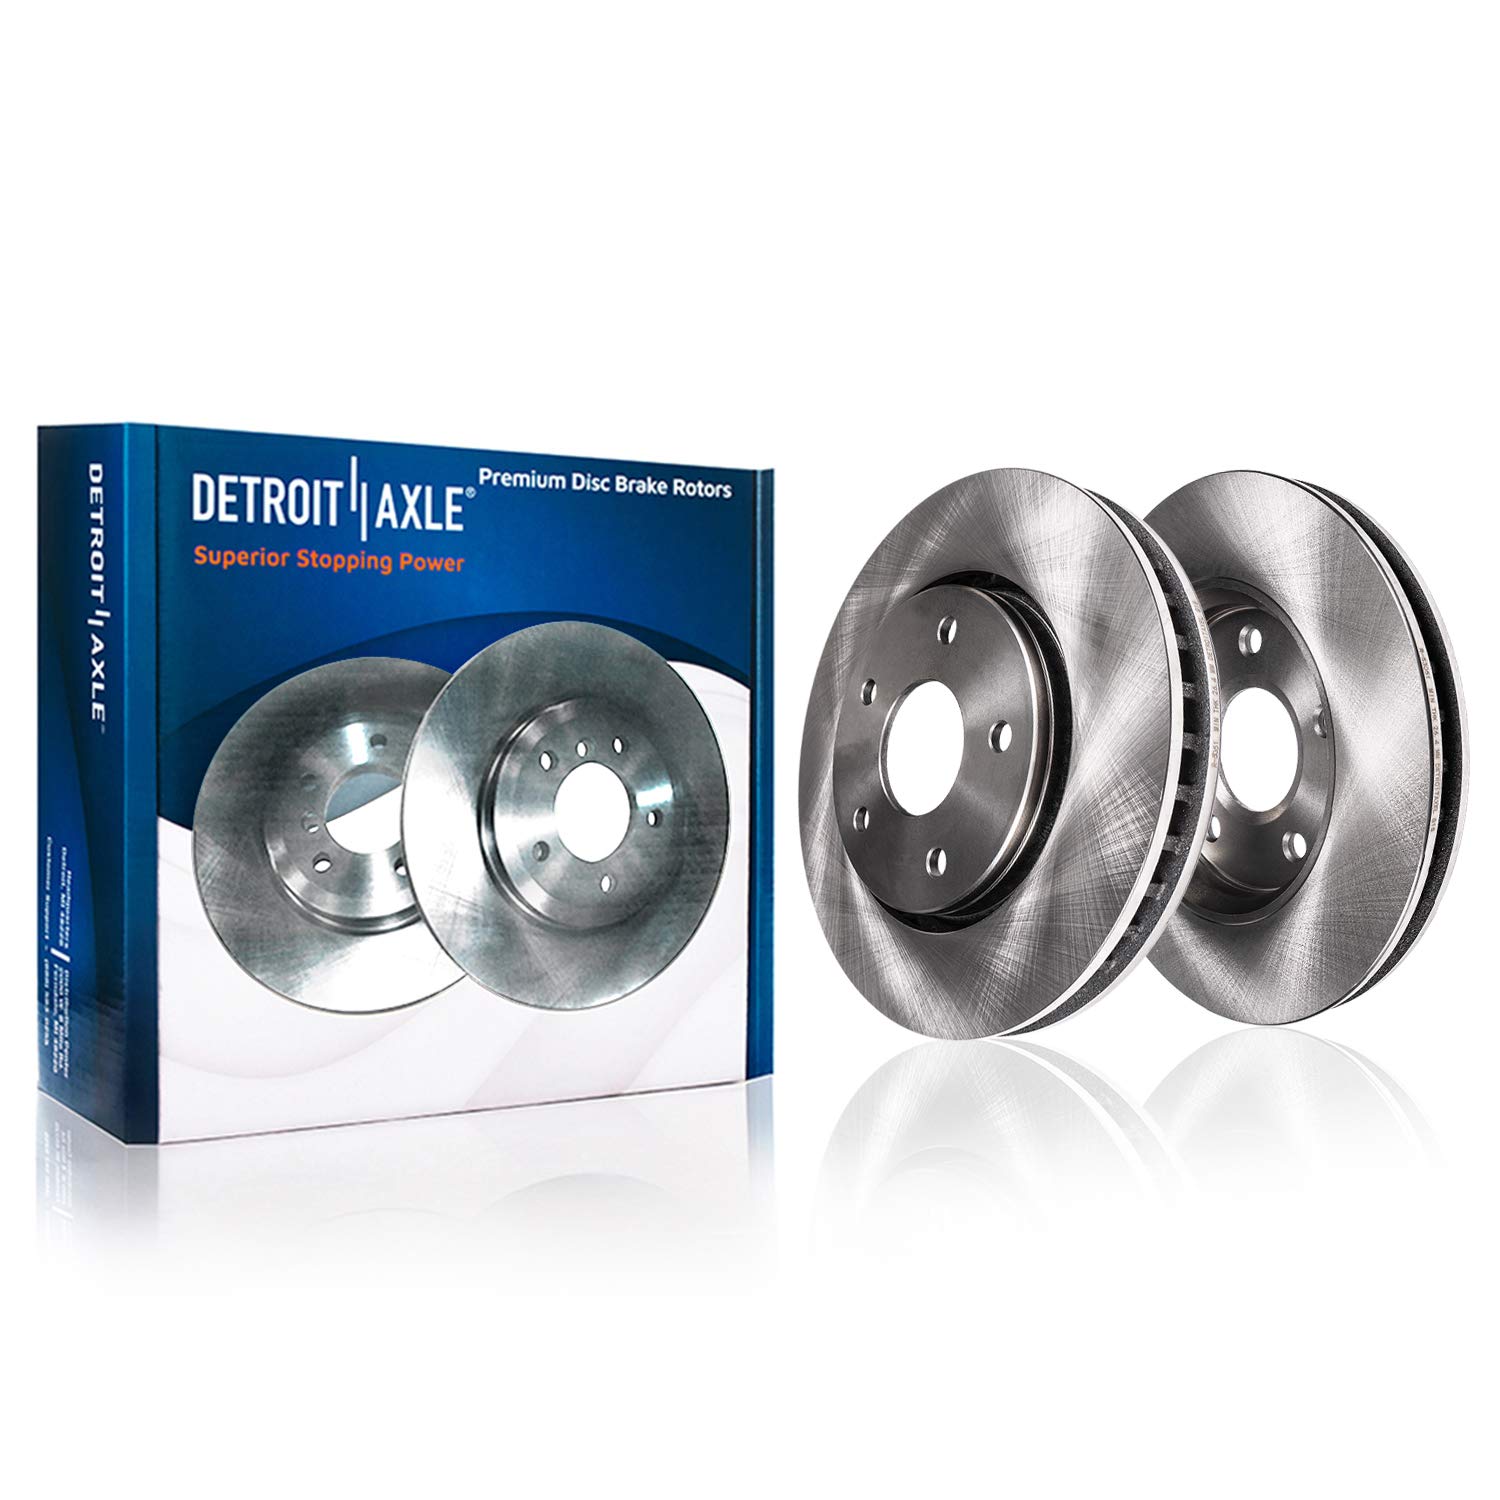 Detroit Axle - Brake Kit for 01-05 BMW 325xi Ceramic Brake Rotors Brakes Pads 2001 2002 2003 2004 2005 Front and Rear Replacement